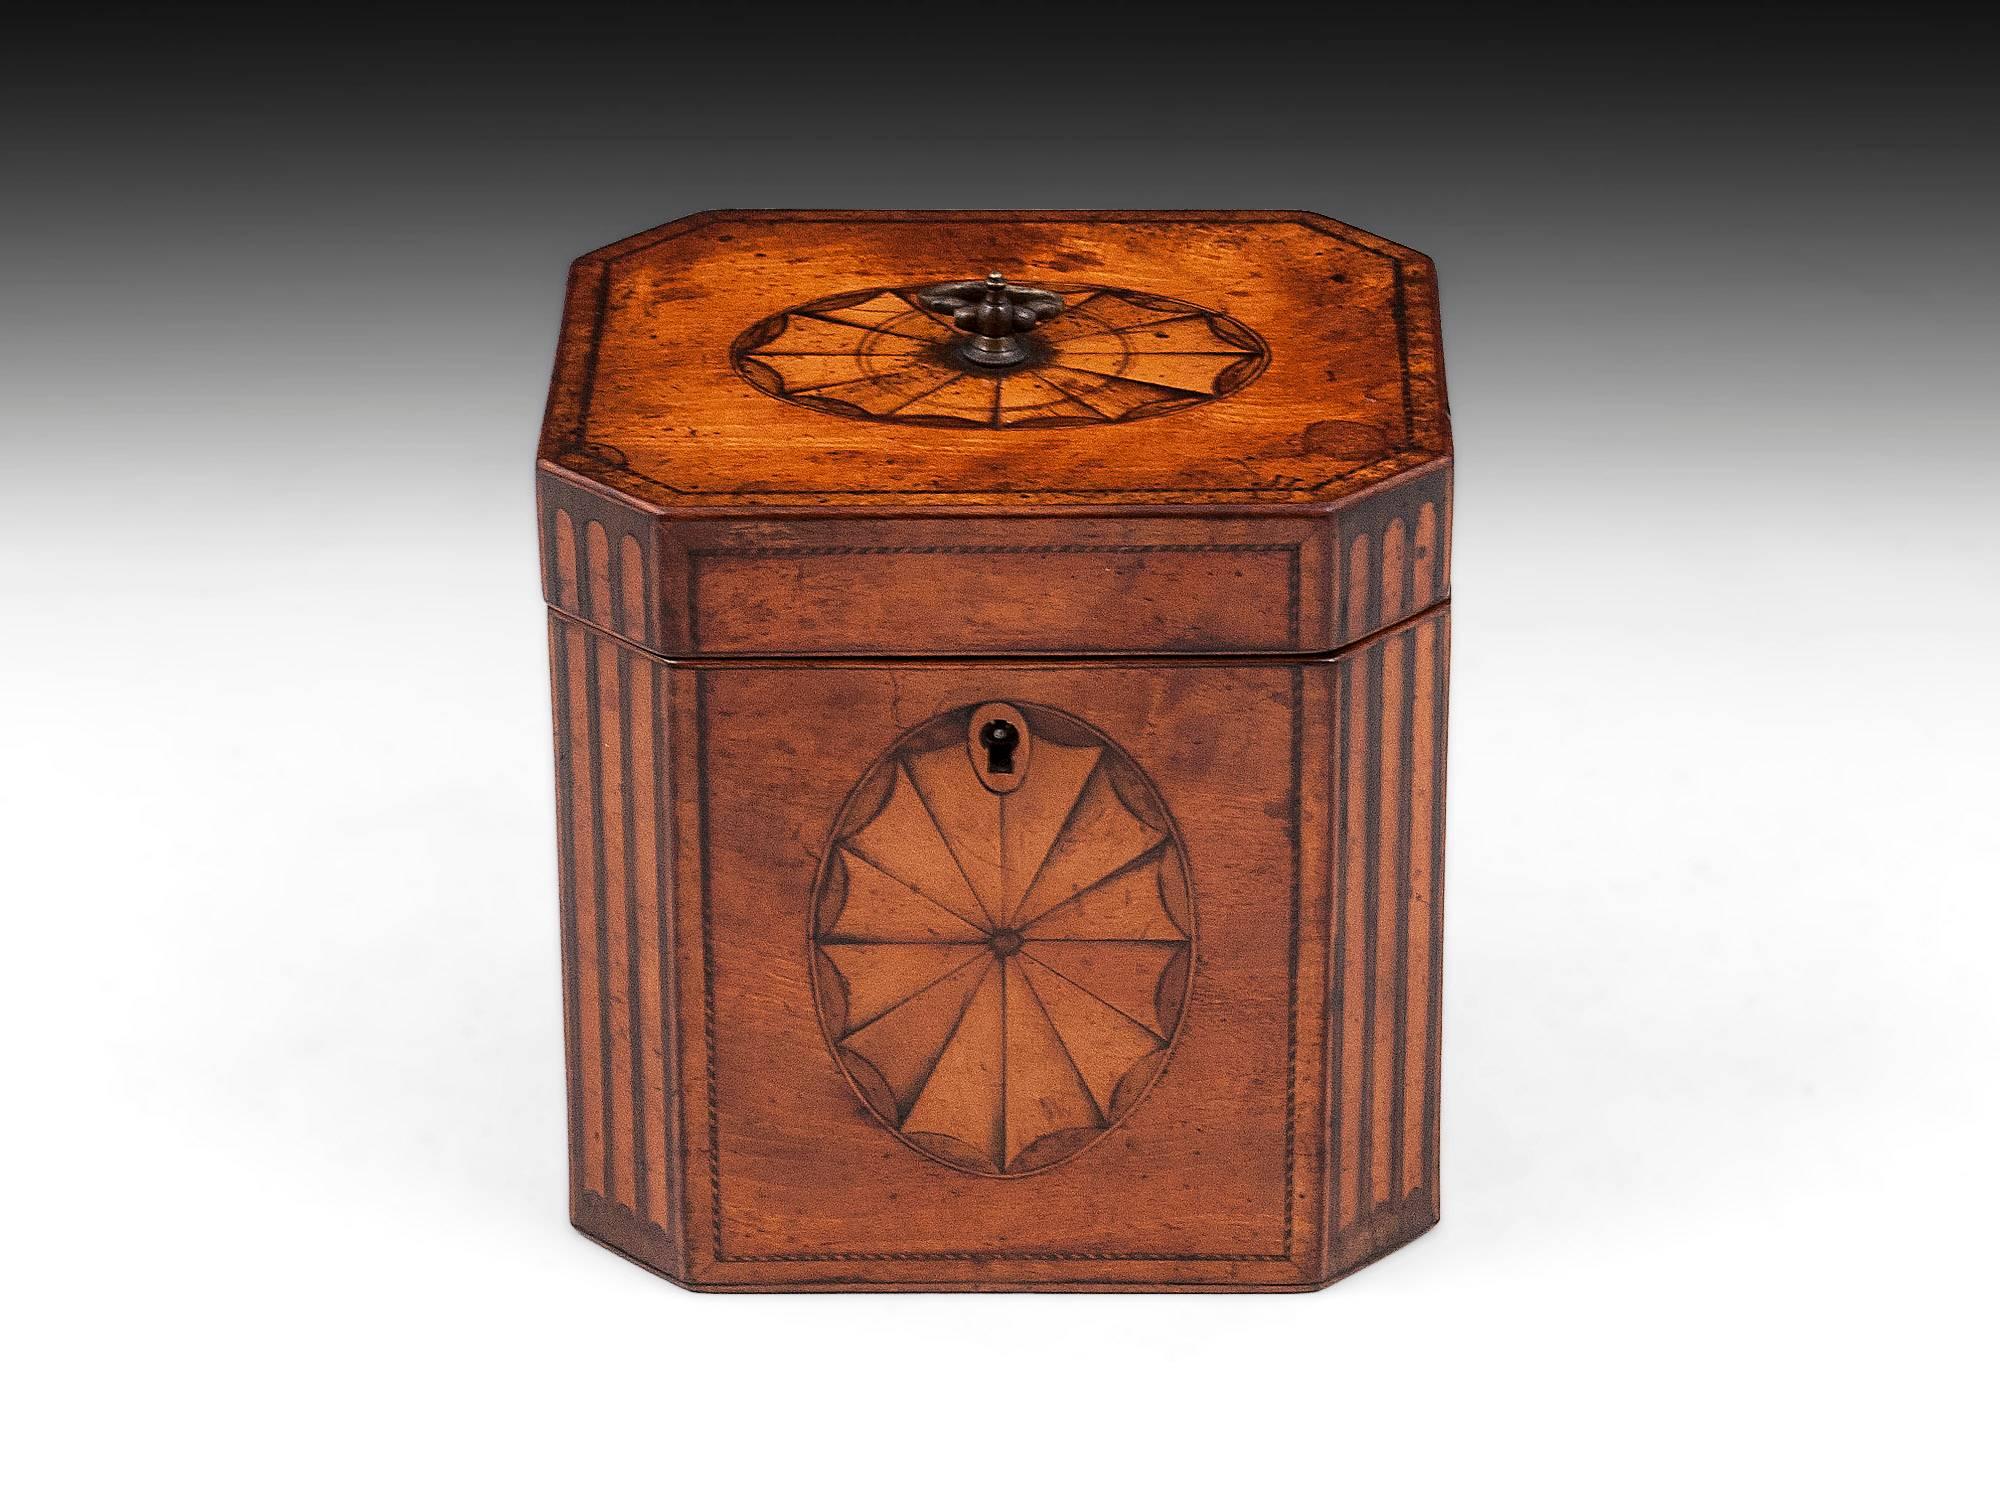 Beautiful satinwood tea caddy with fluted cants and oval fan inlays to the front and top and chequered stringing. Has wonderful untouched patination.

The interior features a single floating lid with a brass handle, and has traces of its original